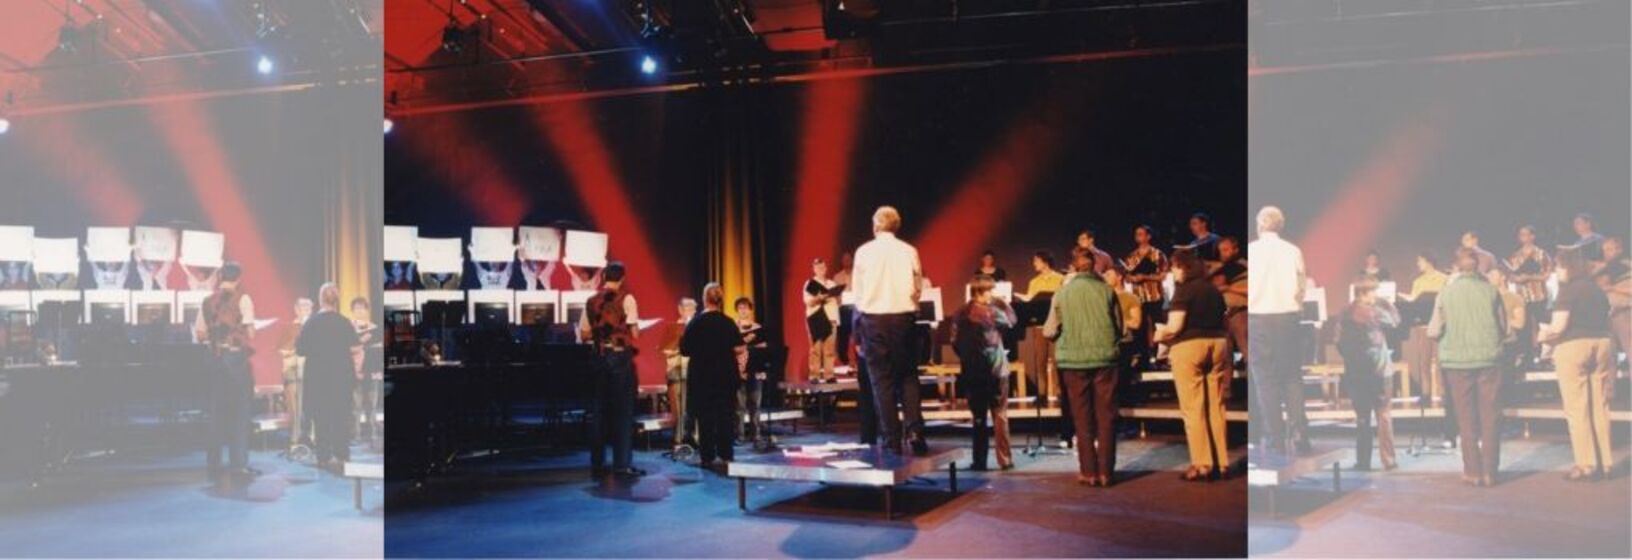 Choir of people standing on tiered platform in theatre with red lighting and curtain backdrop, conductor in centre (back to camera)